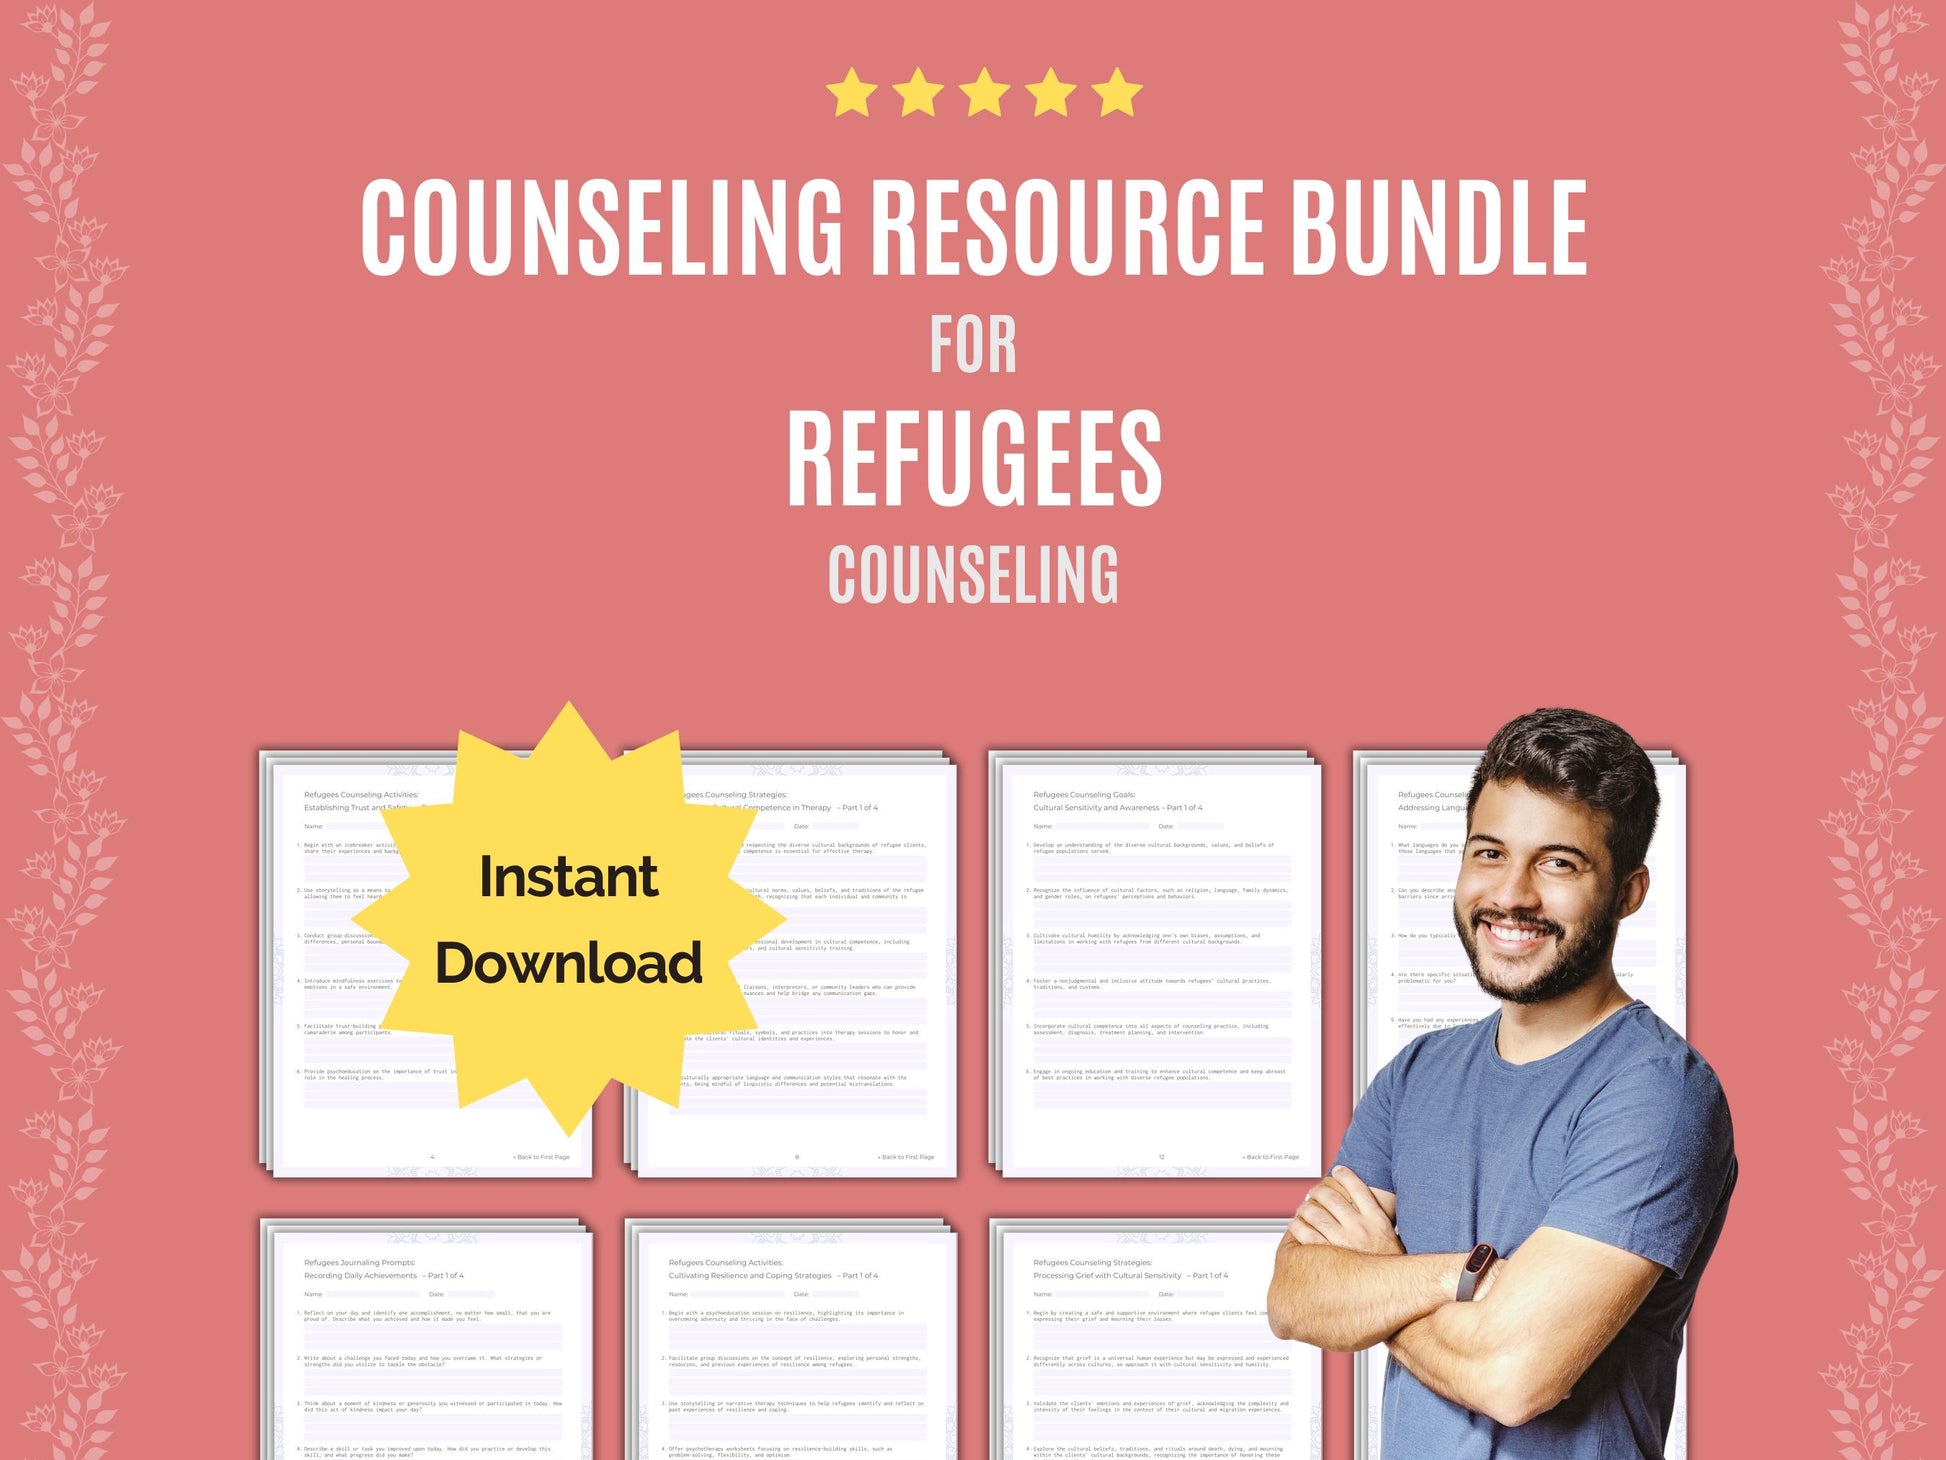 Refugees Workbook, Refugees Counseling, Mental Health, Counselor, Therapist, Refugees Resource, Refugees Worksheet, Refugees Therapy, Refugees Bundle, Refugees Content, Refugees Template, Refugees Idea, Refugees Tool